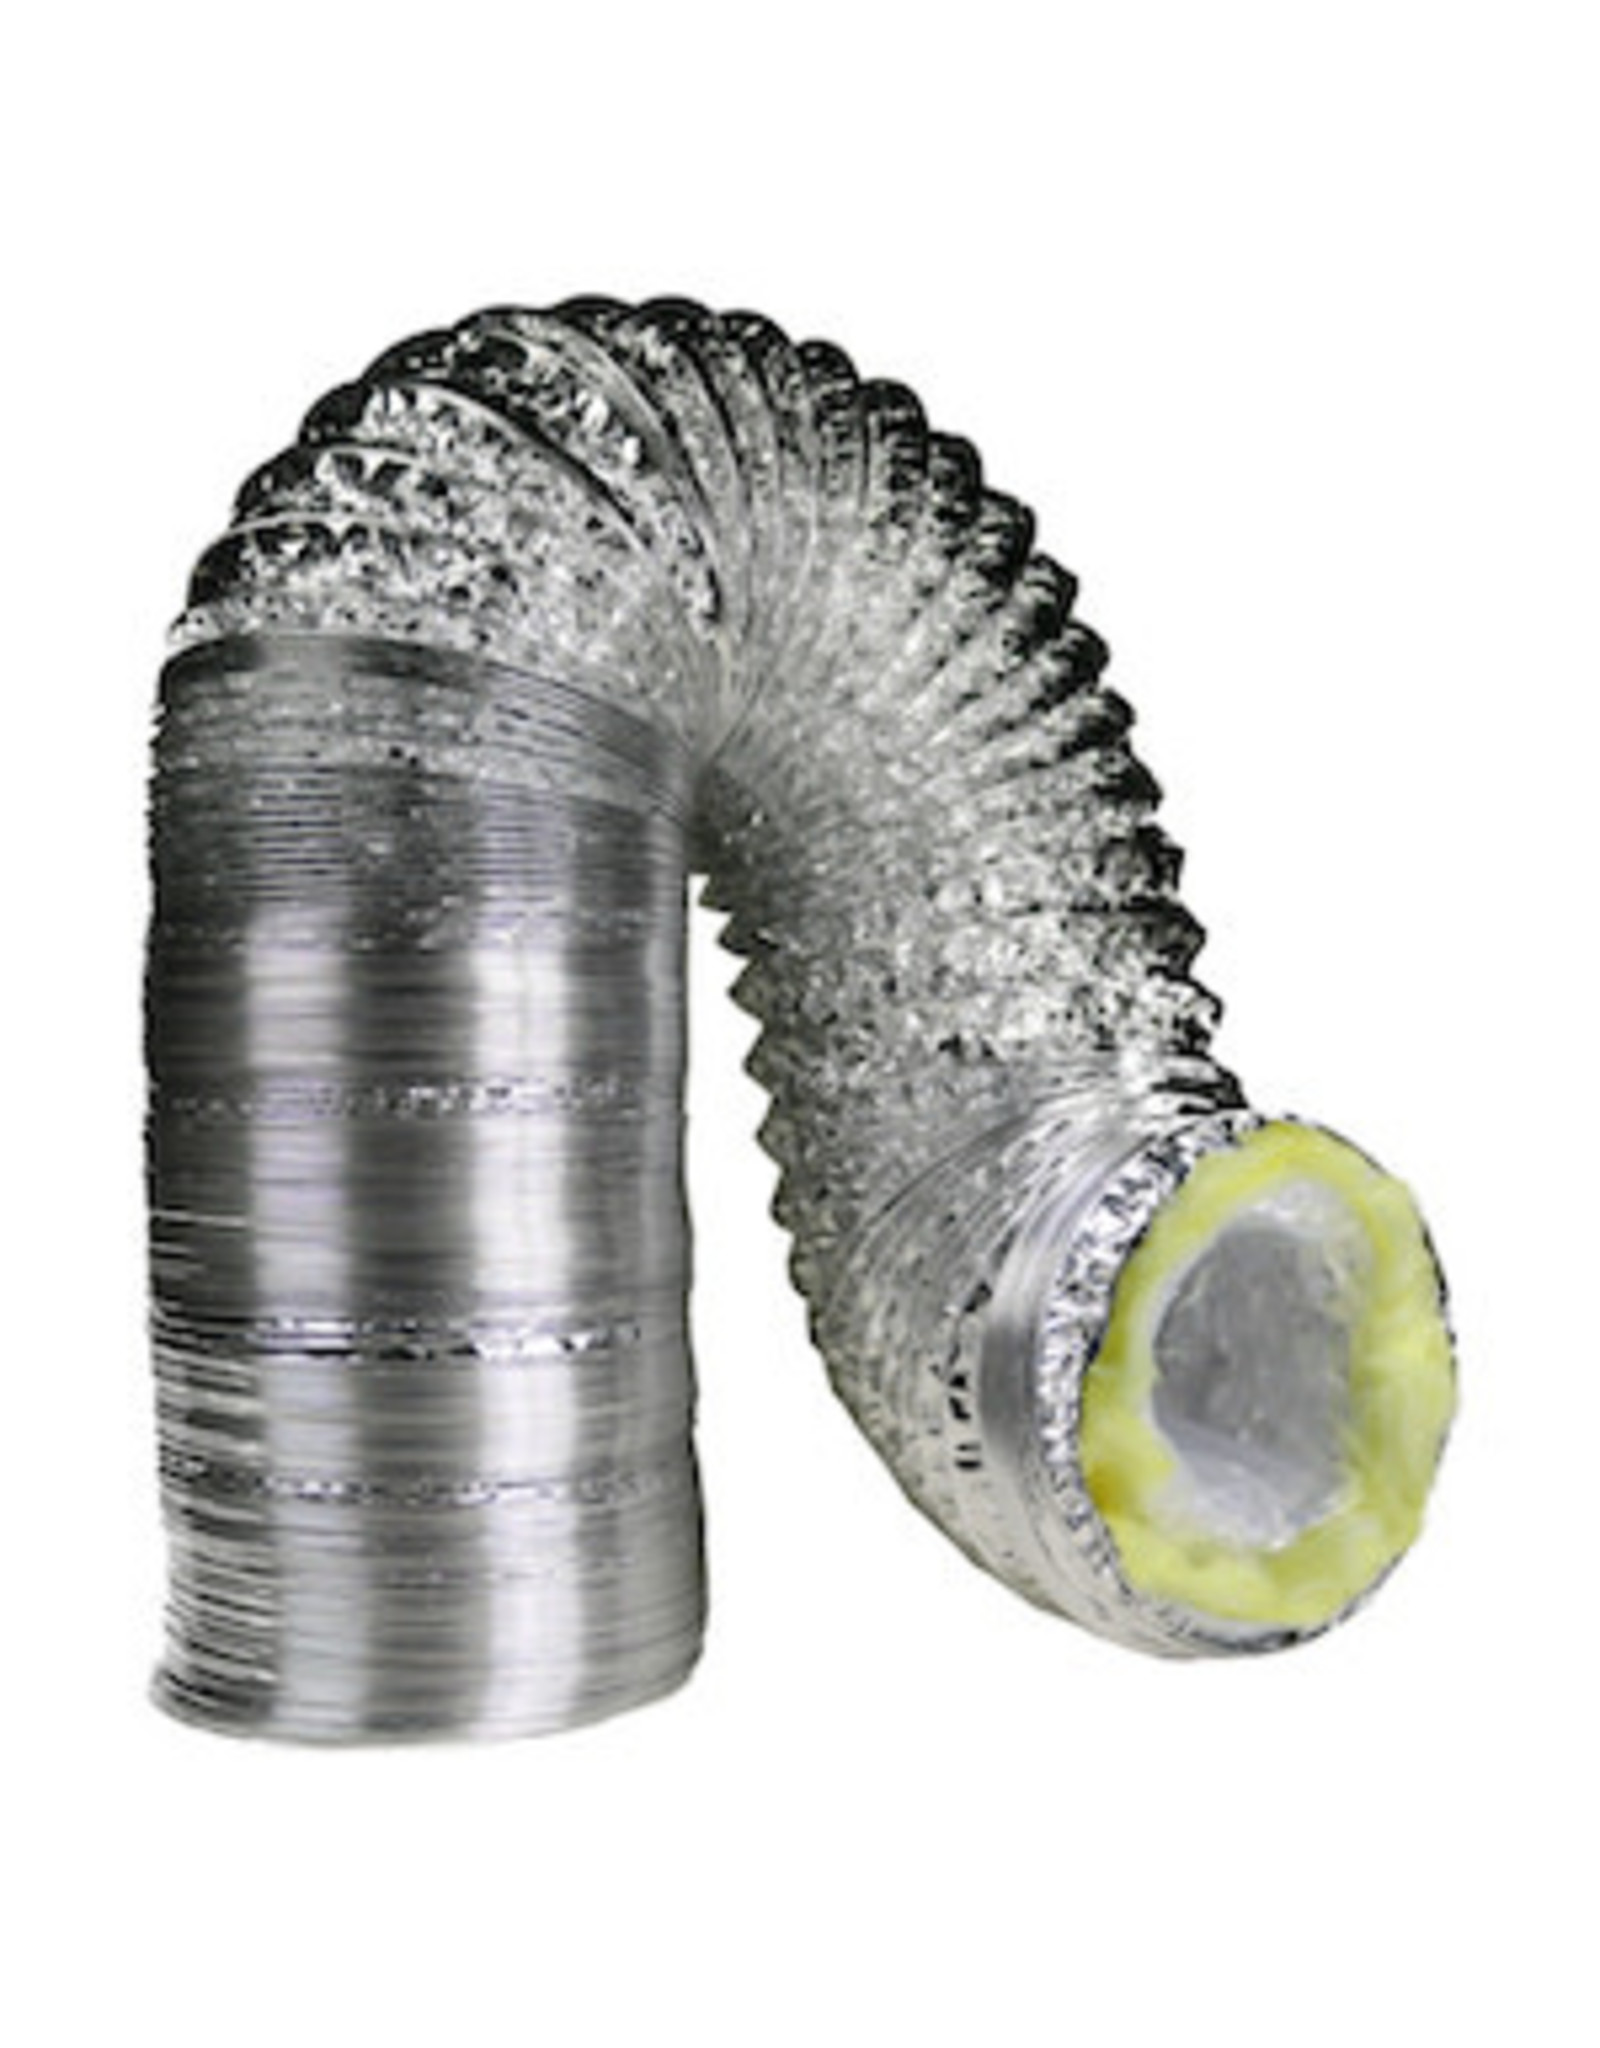 DL Wholesale 4'' x 25' Insulated Ducting